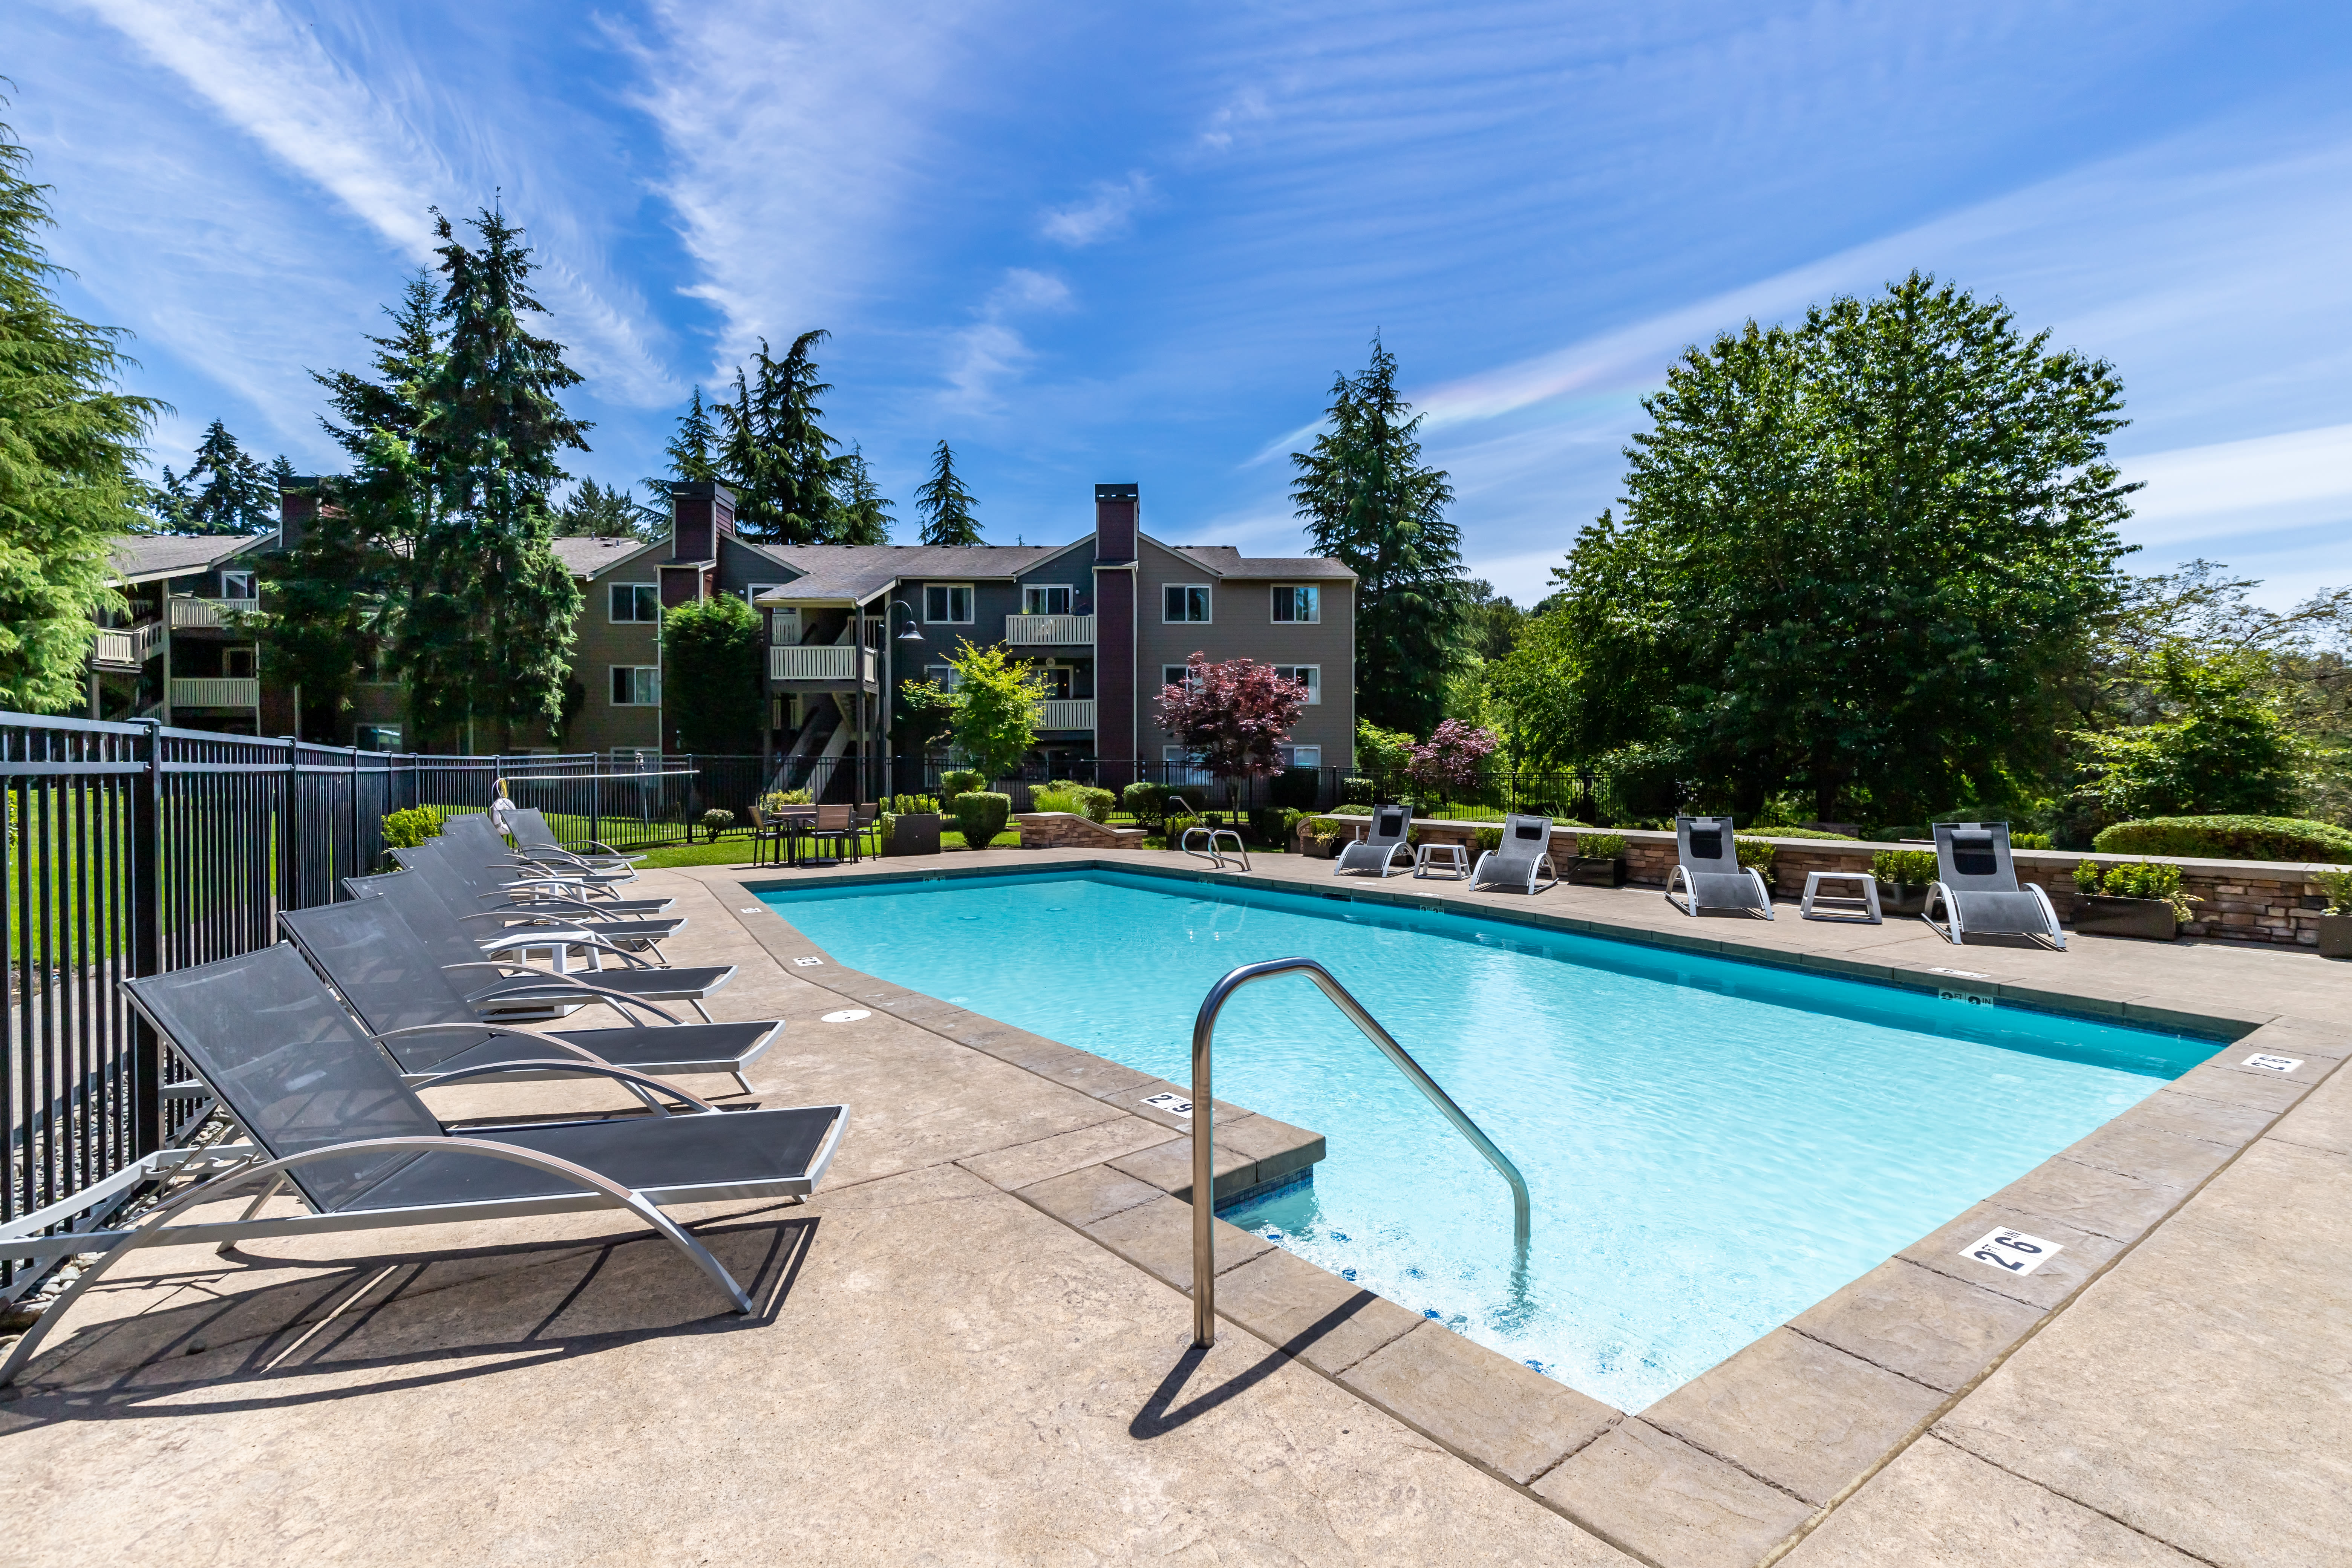 Pool area at The Preserve at Forbes Creek in Kirkland, Washington